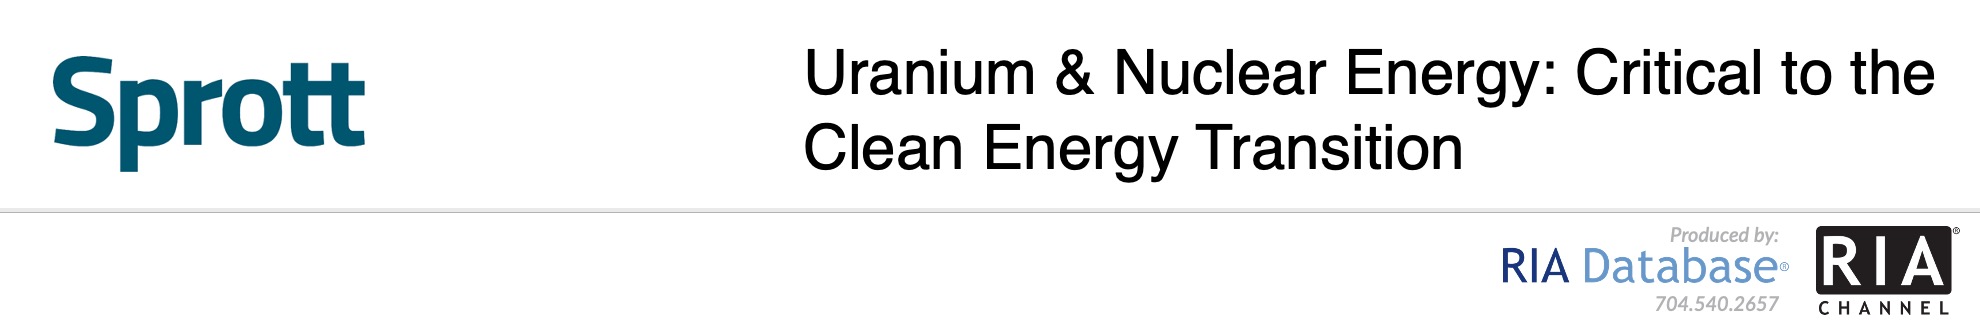 Uranium and Nuclear Energy: Their Roles in the Energy Transition